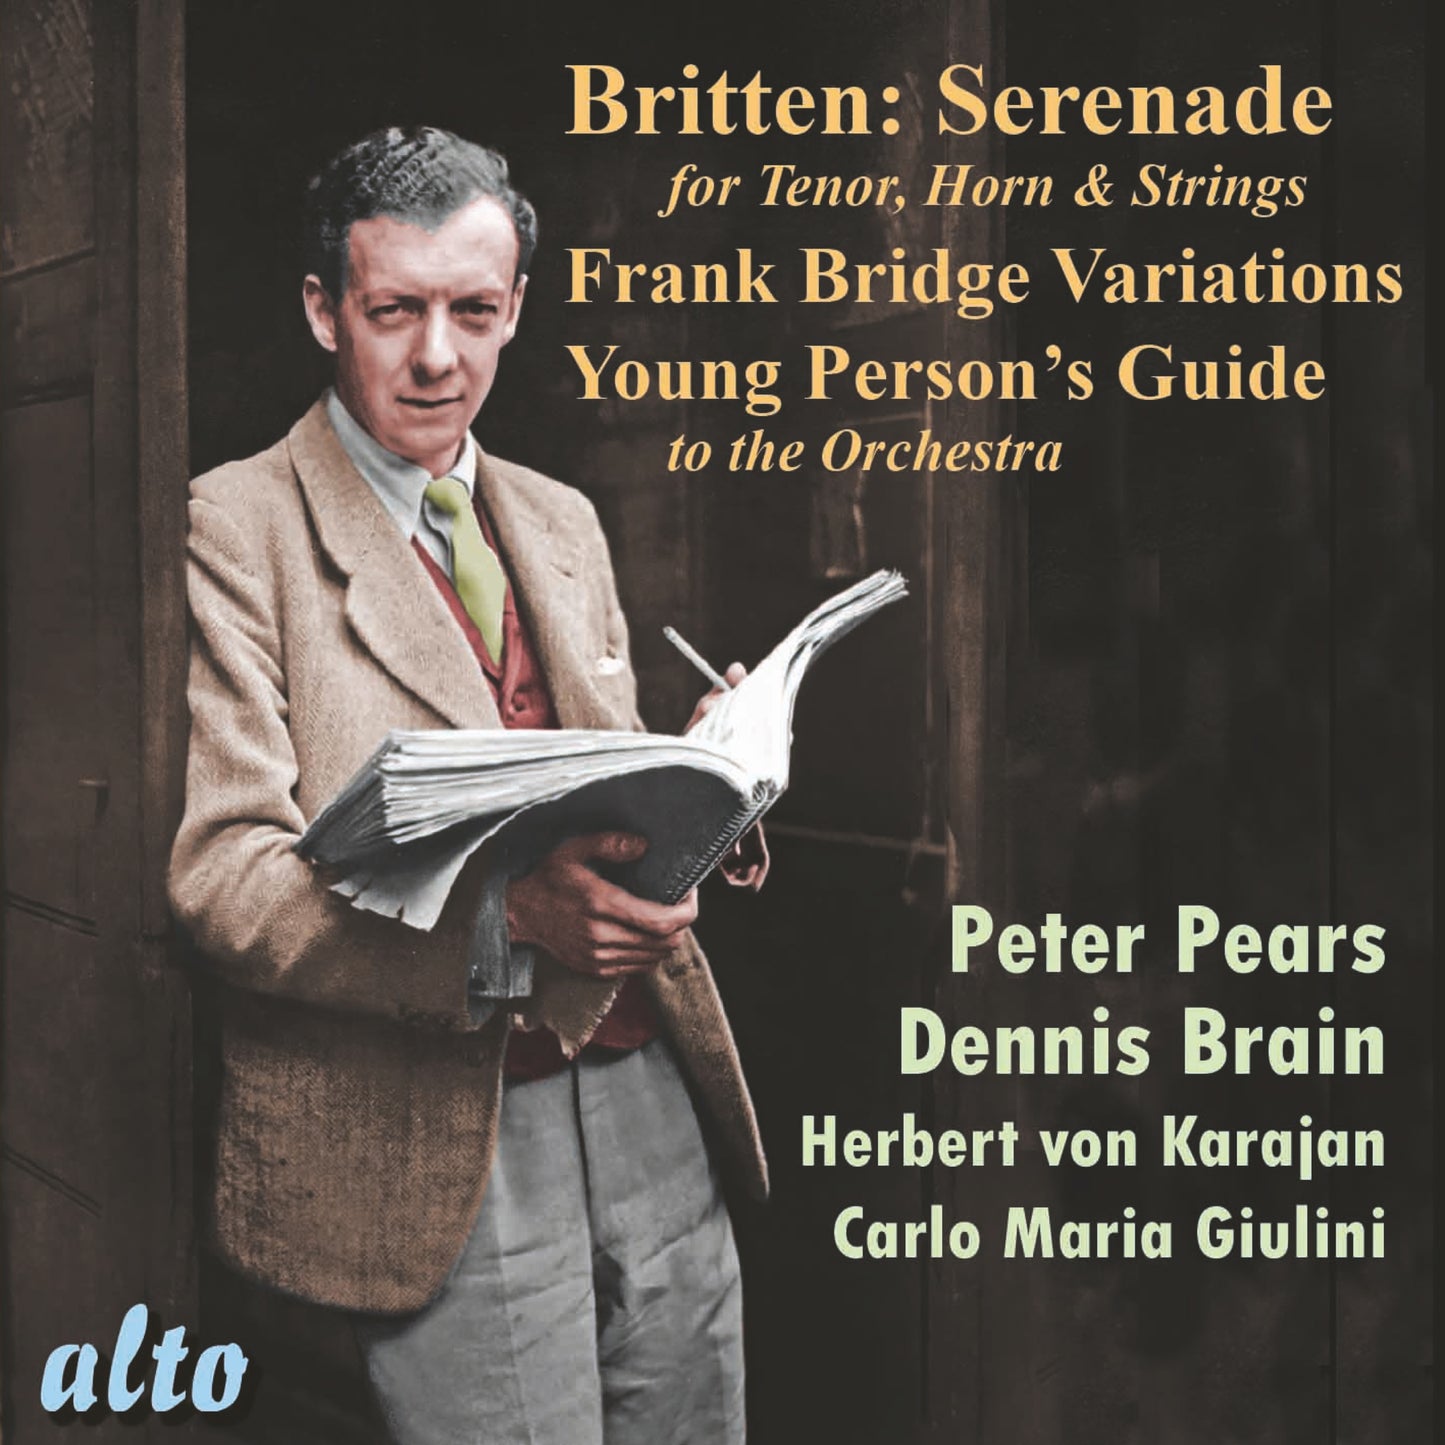 BRITTEN: SERENADE FOR TENOR, HORN AND STRINGS; BRIDGE VARIATIONS, YOUNG PERSON'S GUIDE, SOIREES MUSICALES - BRITTEN, PEARS, KARAJAN, BOULT